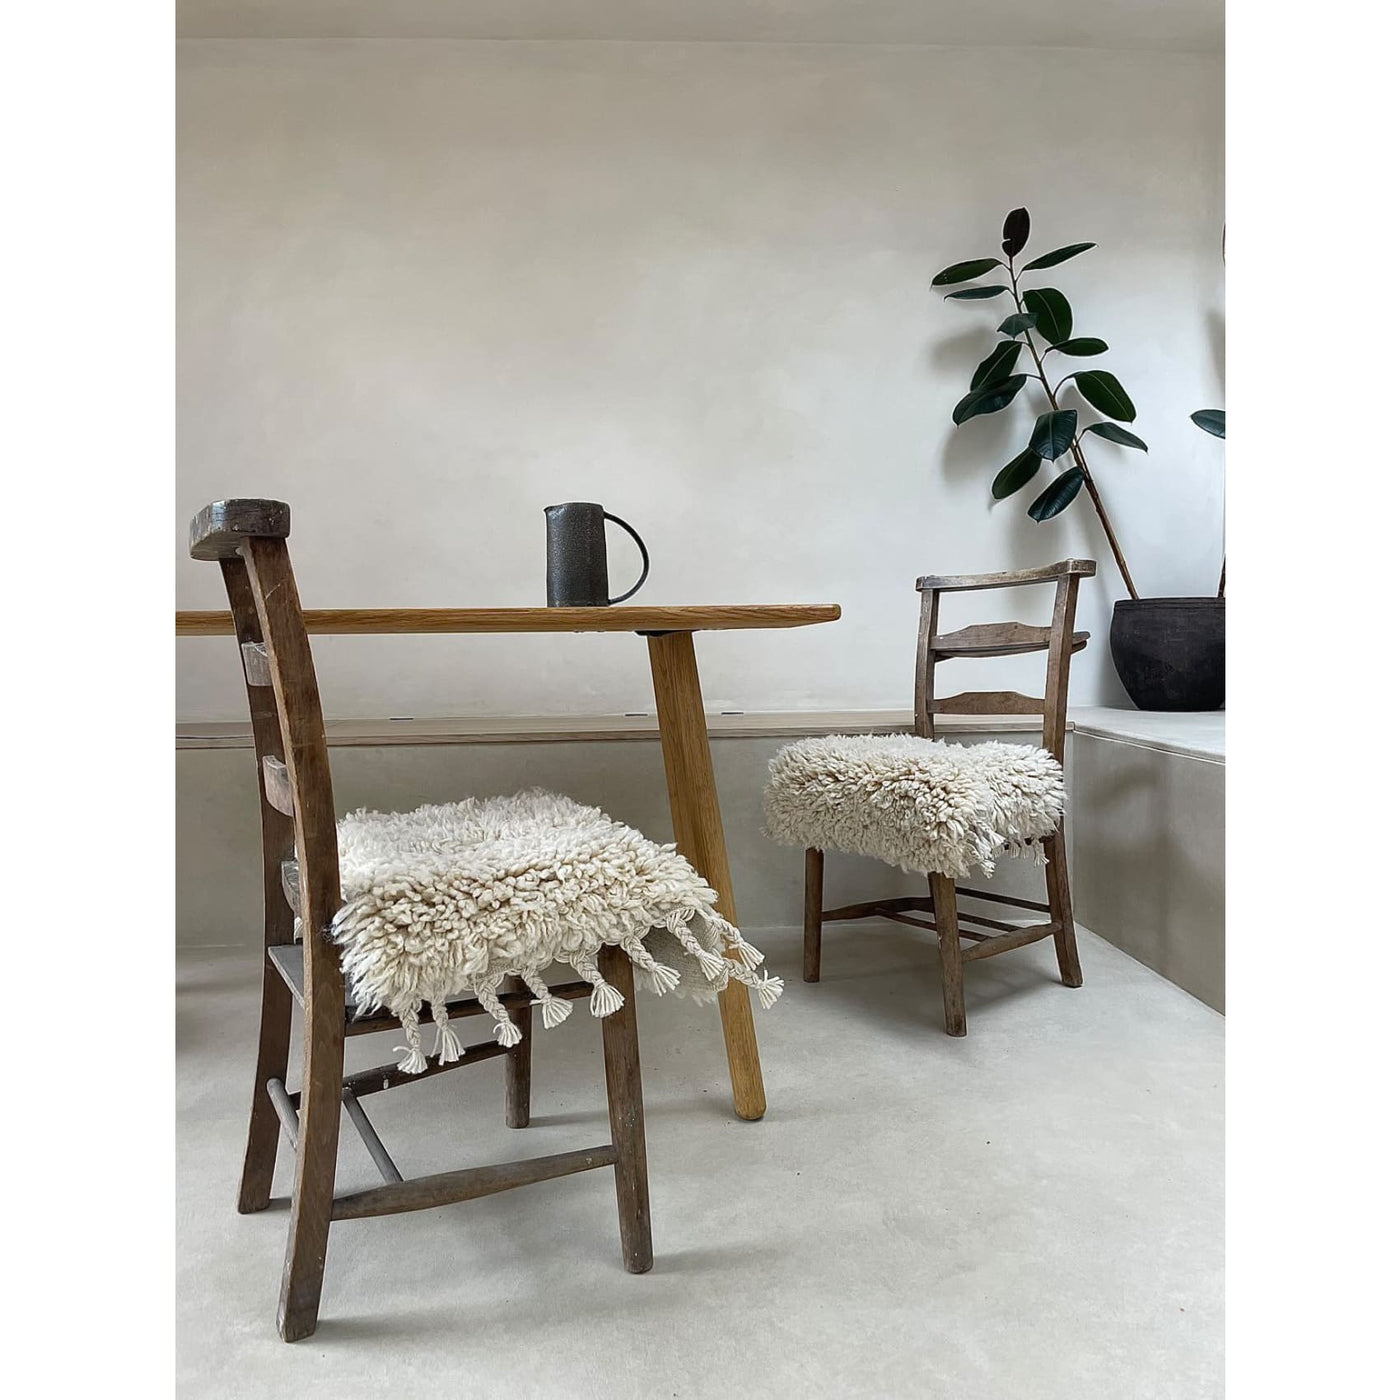 Kabarik - Hand Knotted Wool Floor & Chair Rug - Made to Order